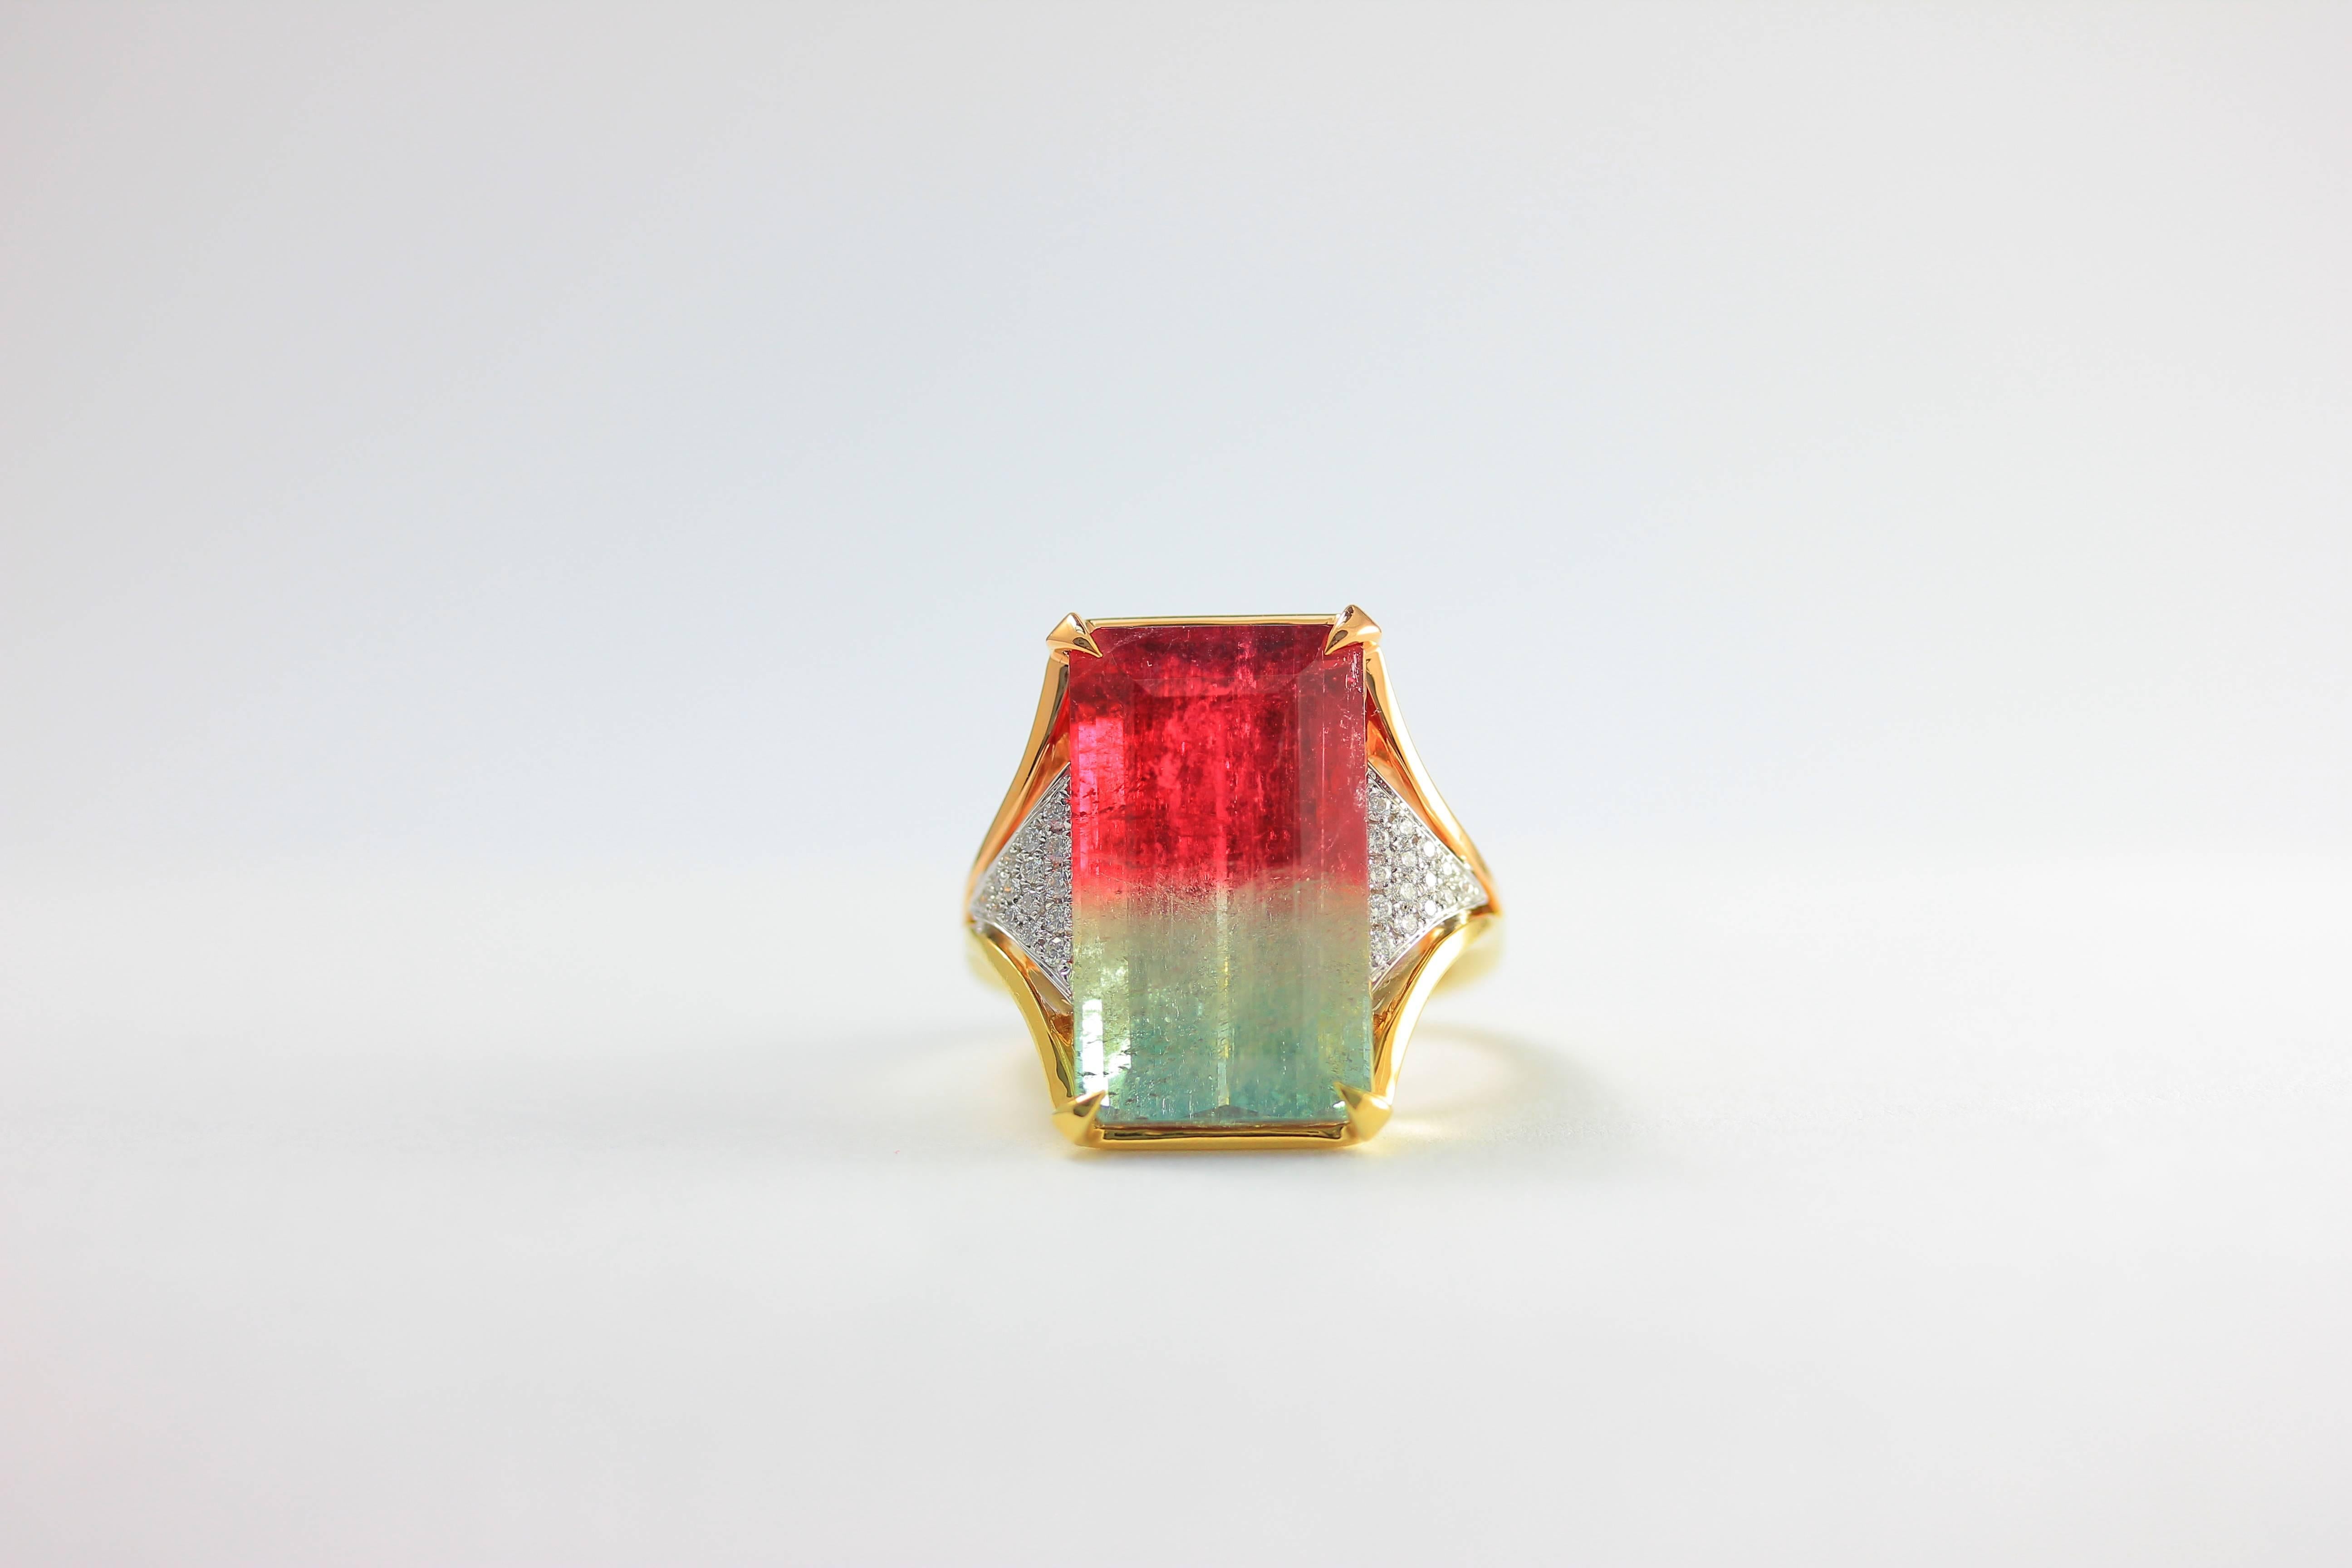 One-of-a-kind Frederic Sage bi-color Watermelon Tourmaline cocktail ring with white gold diamond accents set in 18 karat yellow and rose gold

Total Bi-color Tourmaline weight: 17.94 ct
Total diamond count: 30
Total diamond weight: 0.17 ct